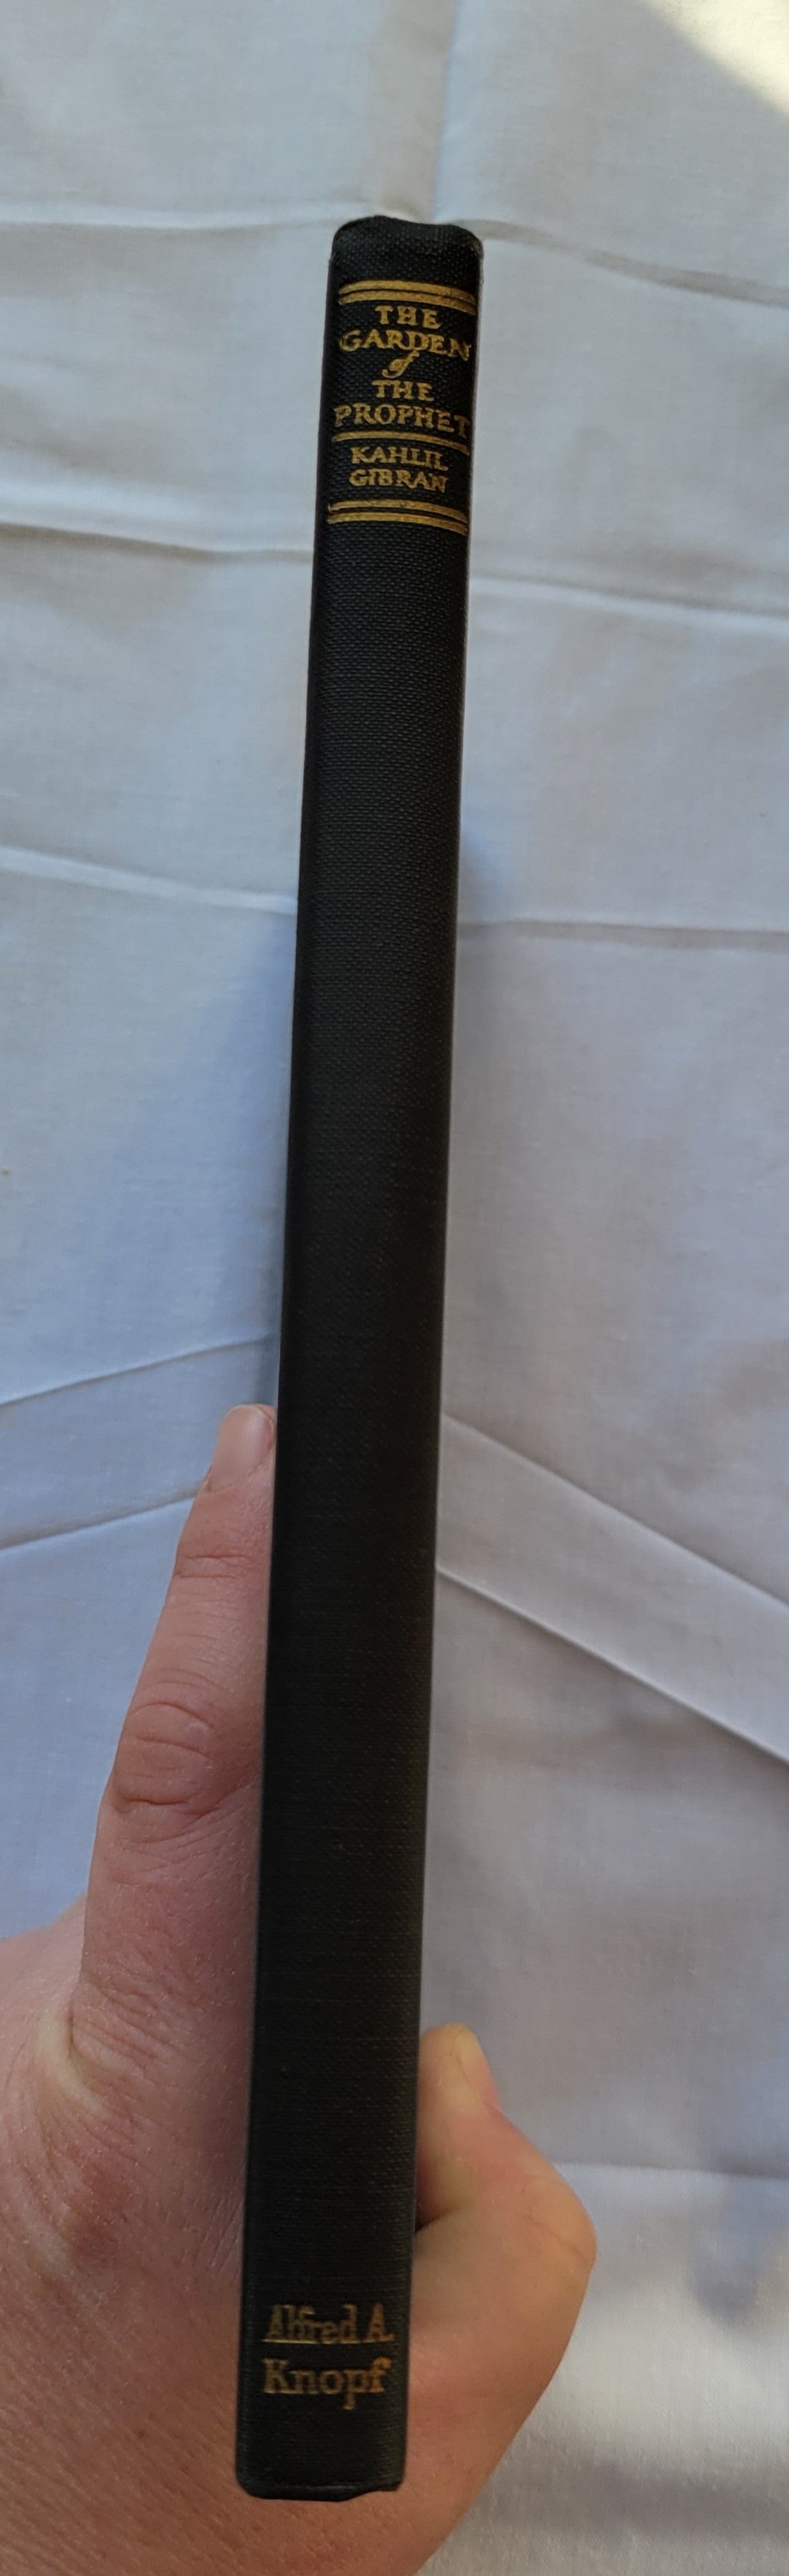 Vintage book for sale “The Garden of the Prophet” by Kahlil Gibran, published by Alfred A. Knoff. Spine.